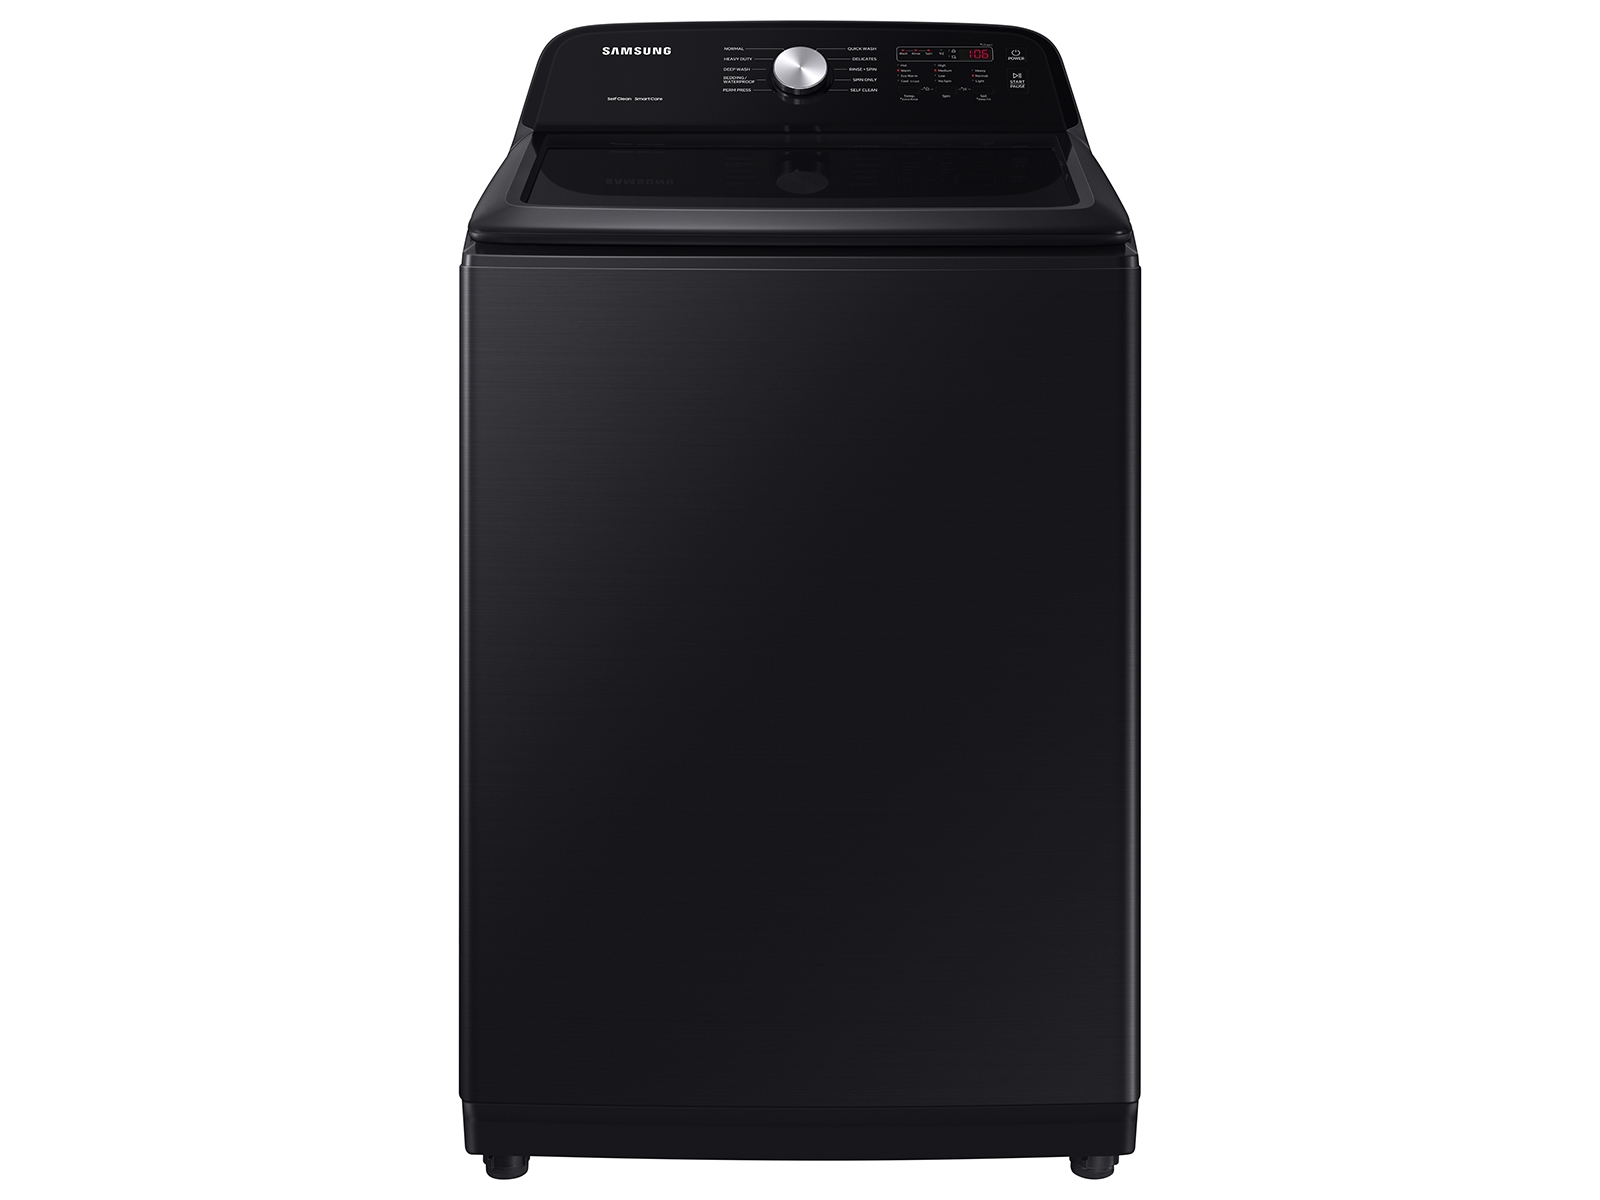 Samsung 5.0 cu. ft. Large Capacity Top Load Washer with Deep Fill and EZ Access Tub in Brushed Black (WA50B5100AV/US)